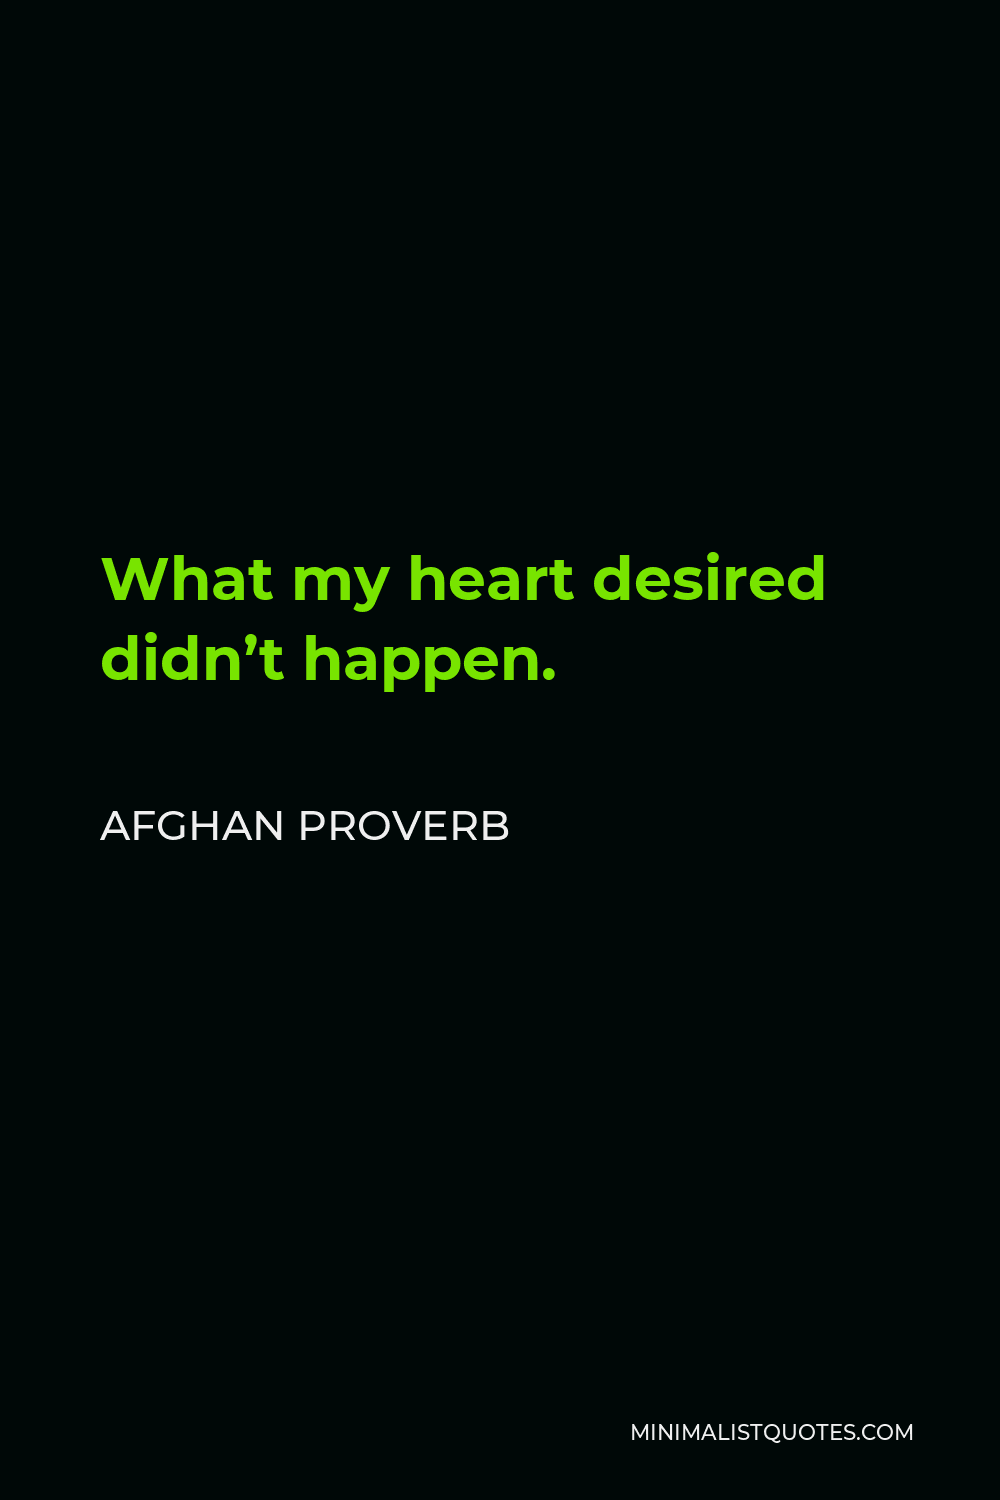 Afghan Proverb Quote - What my heart desired didn’t happen.